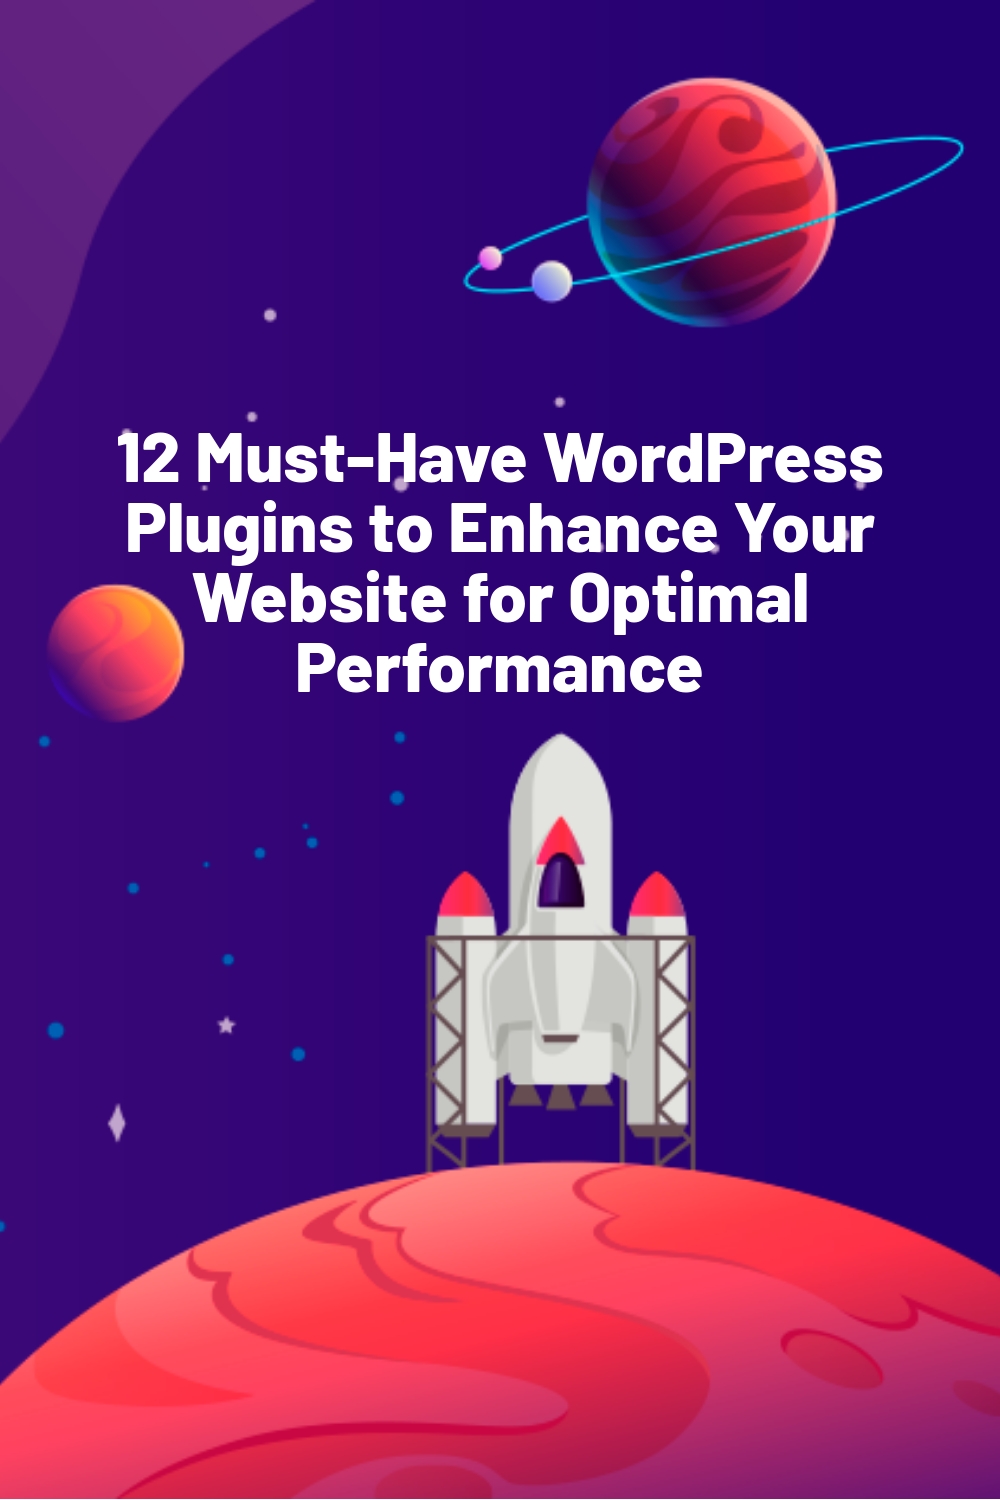 12 Must-Have WordPress Plugins to Enhance Your Website for Optimal Performance